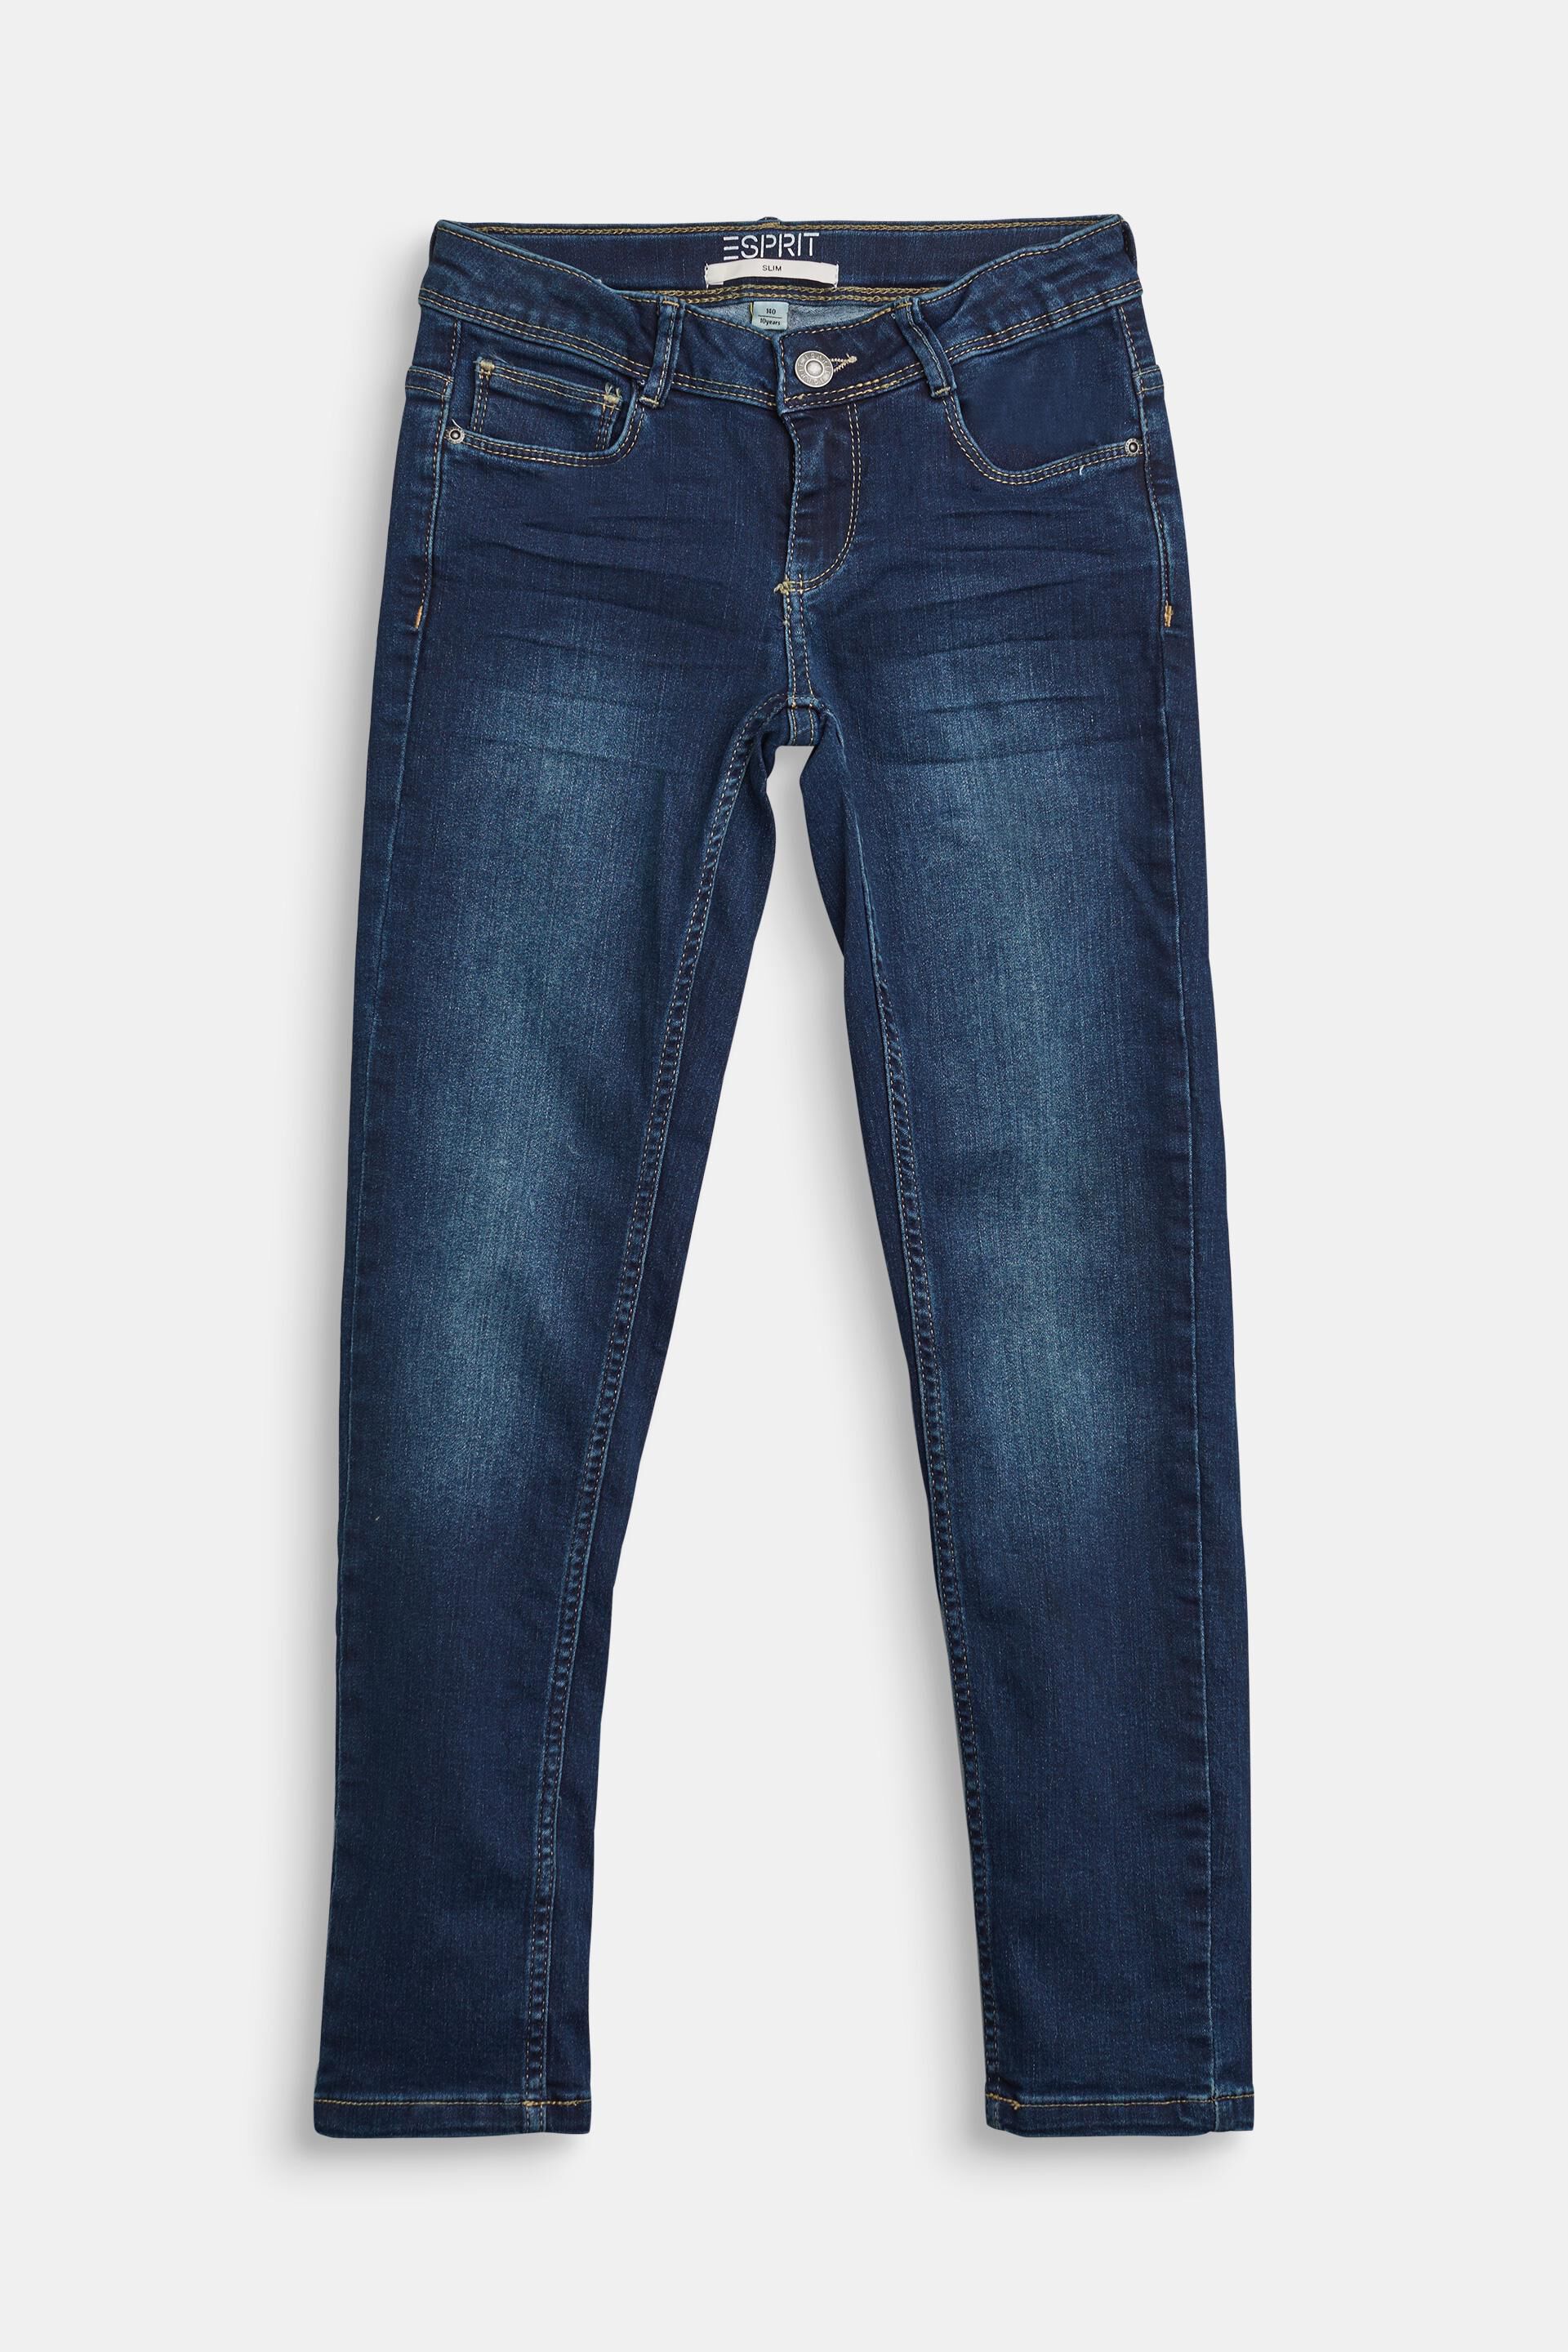 Esprit adjustable an waistband Stretch widths jeans with available different in